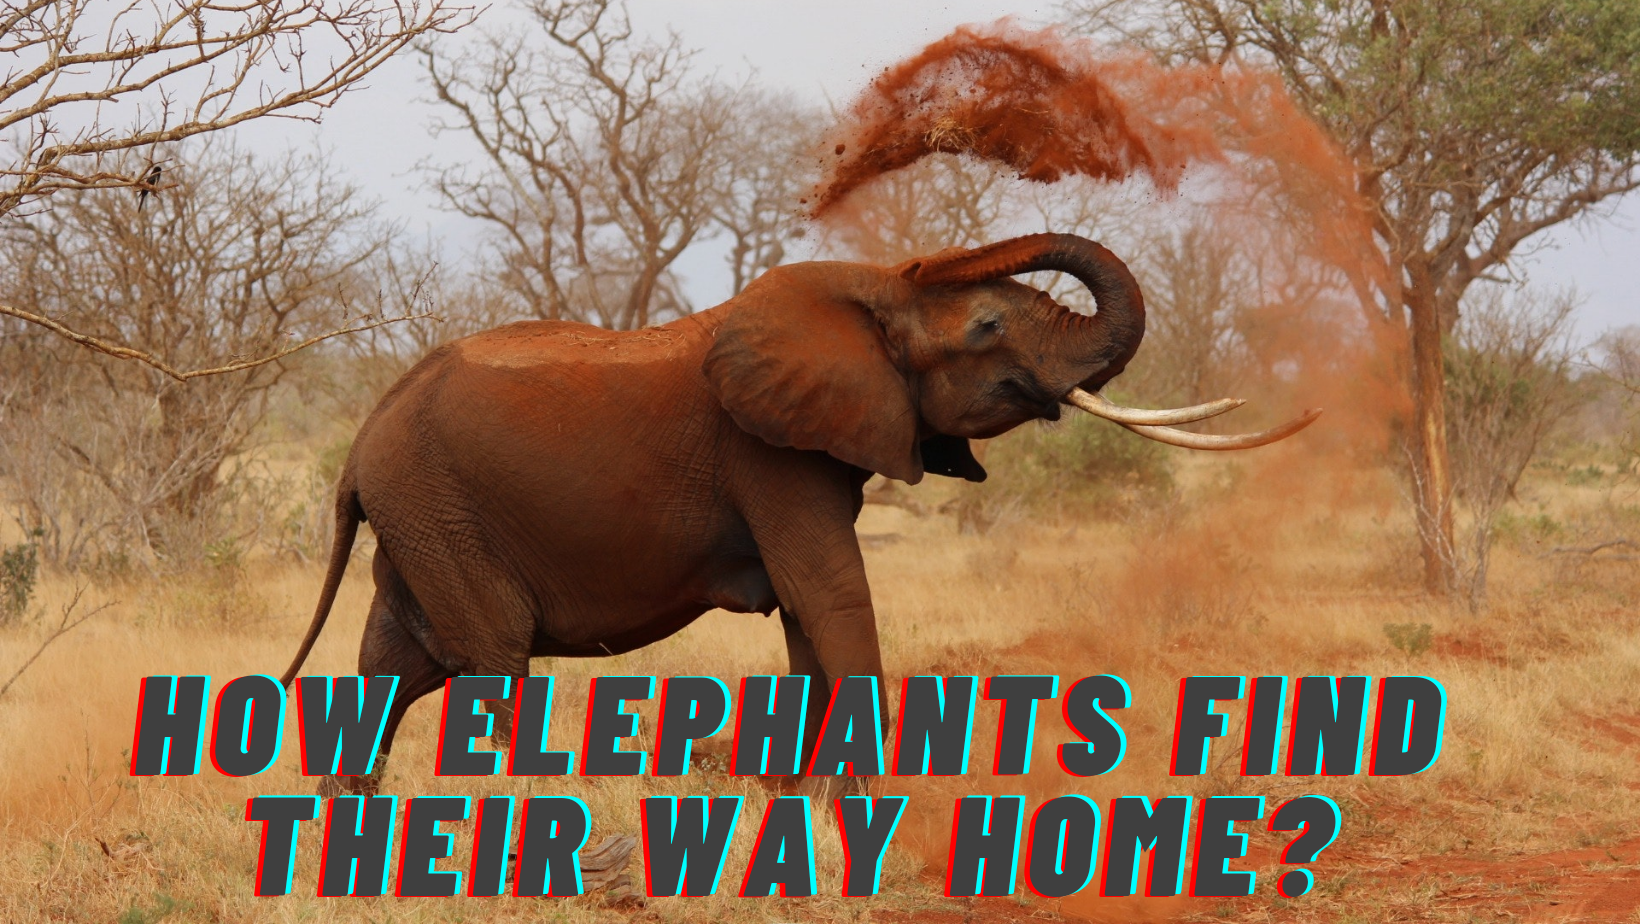 How Elephants Find Their Way Home?